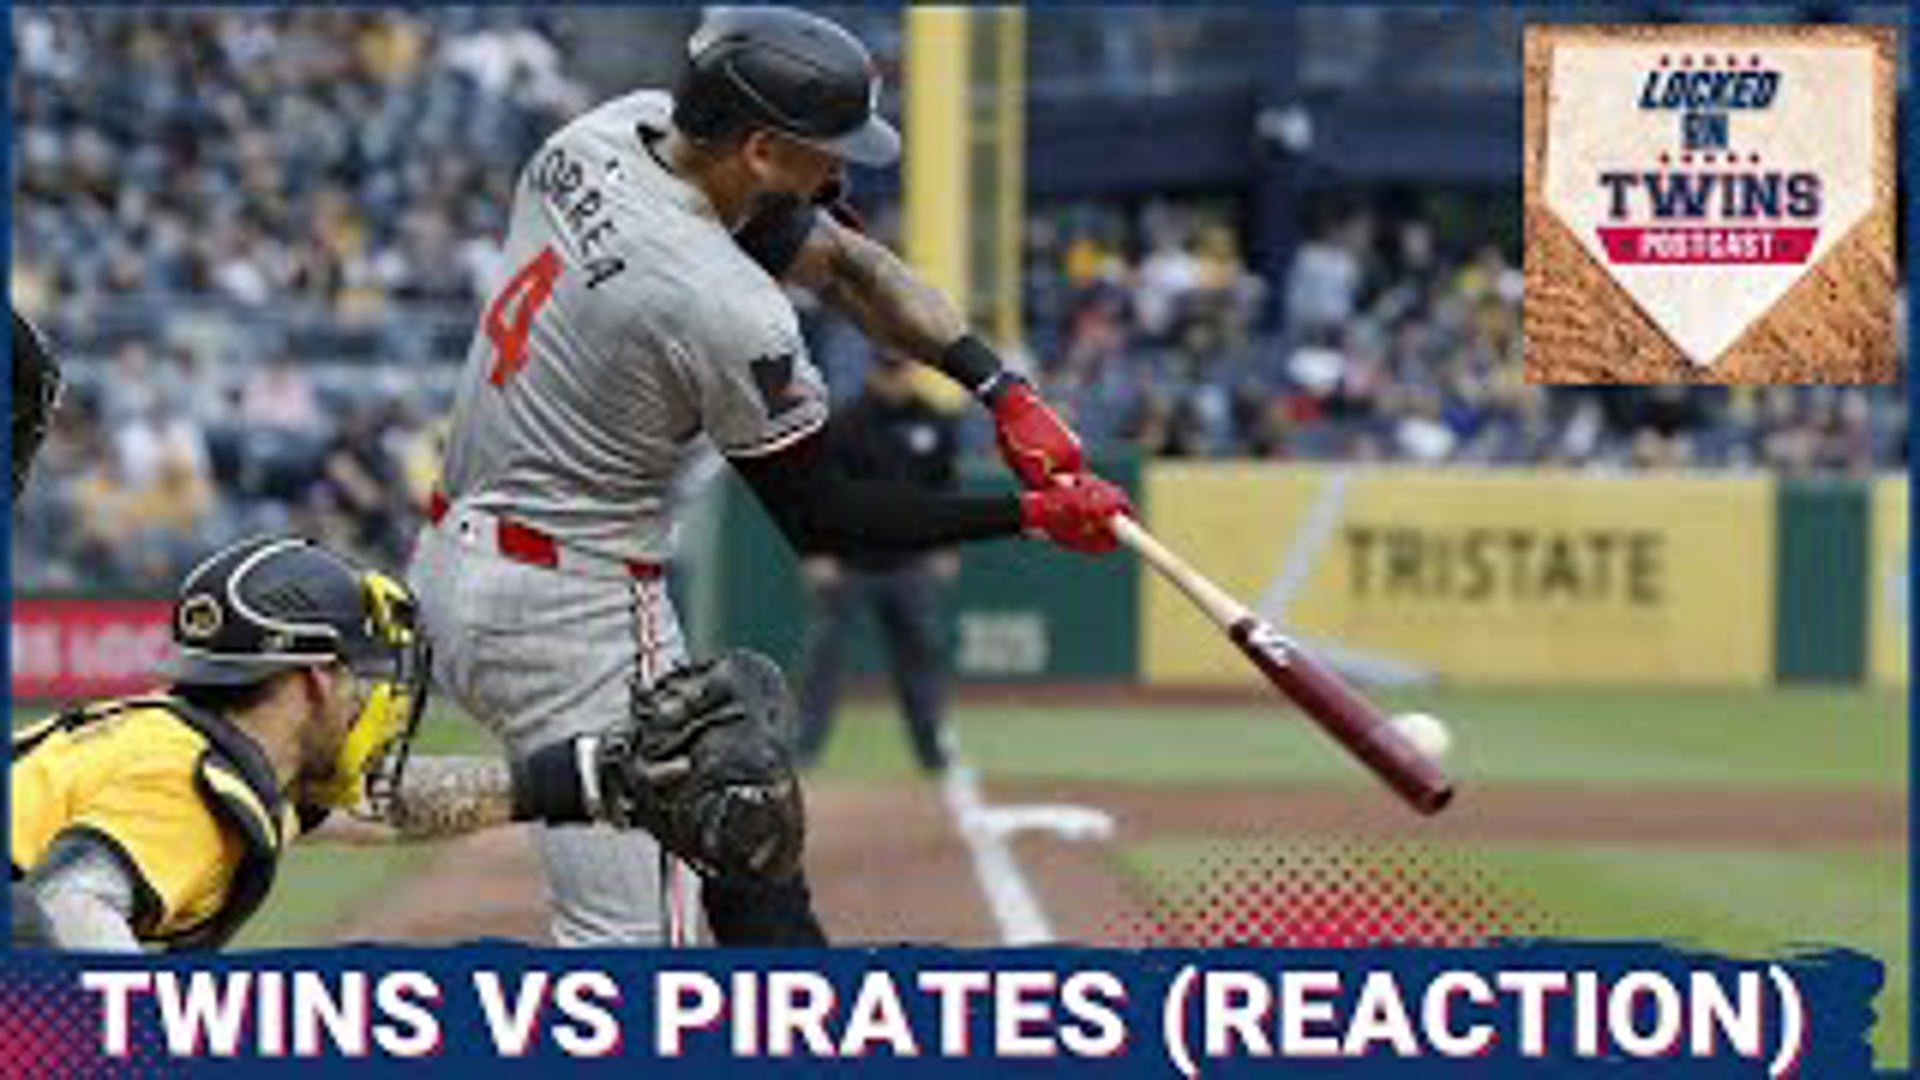 The Minnesota Twins have now lost four in a row as they enter game two against the Pittsburgh Pirates. Join Luke Inman and Theo Tollefson for the instant recap!